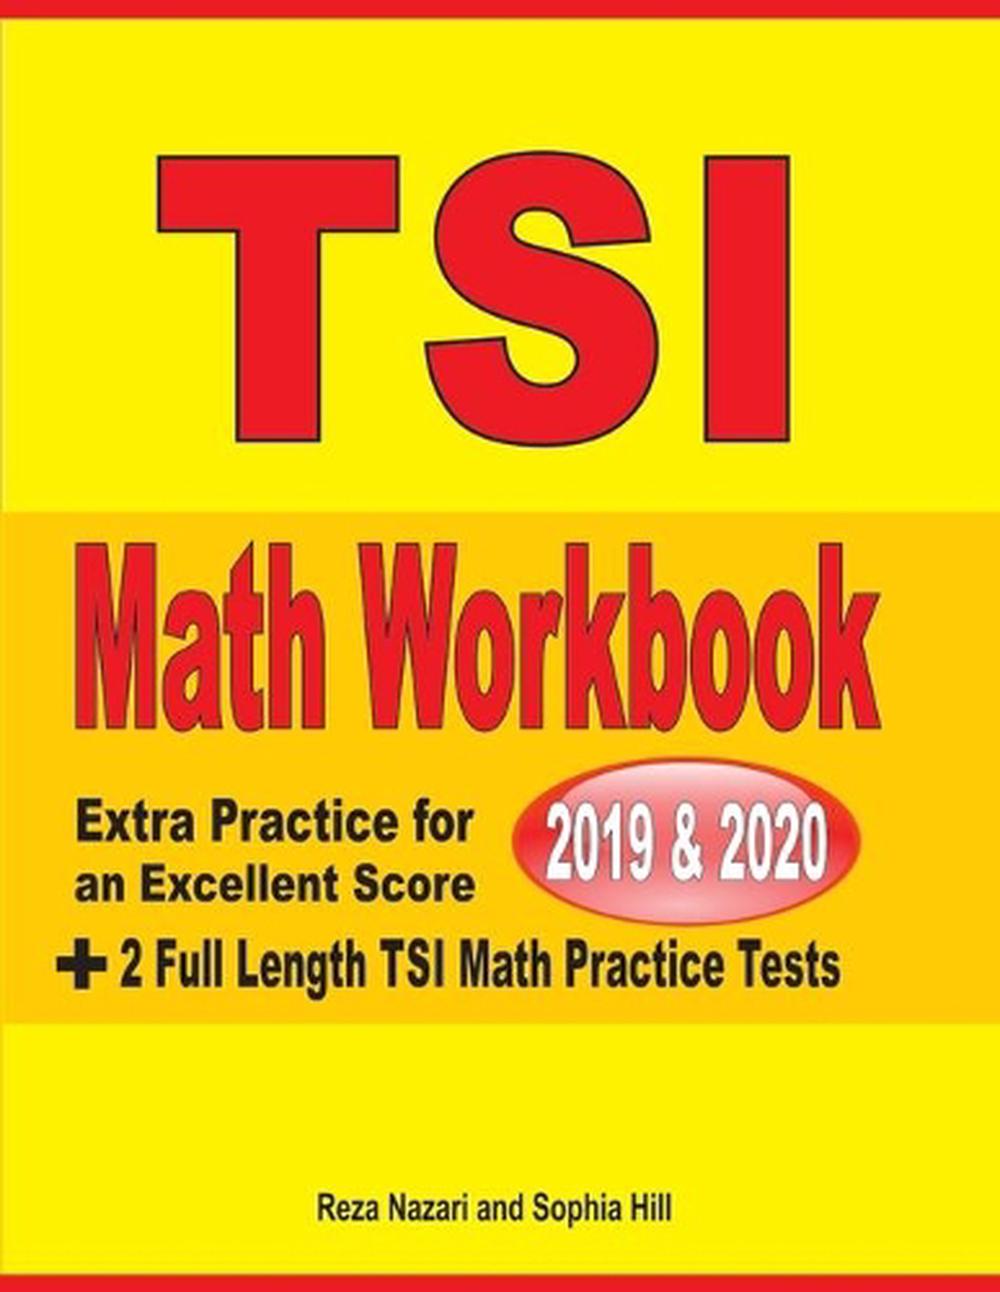 TSI Math Workbook 2019 And 2020 Extra Practice for an Excellent Score